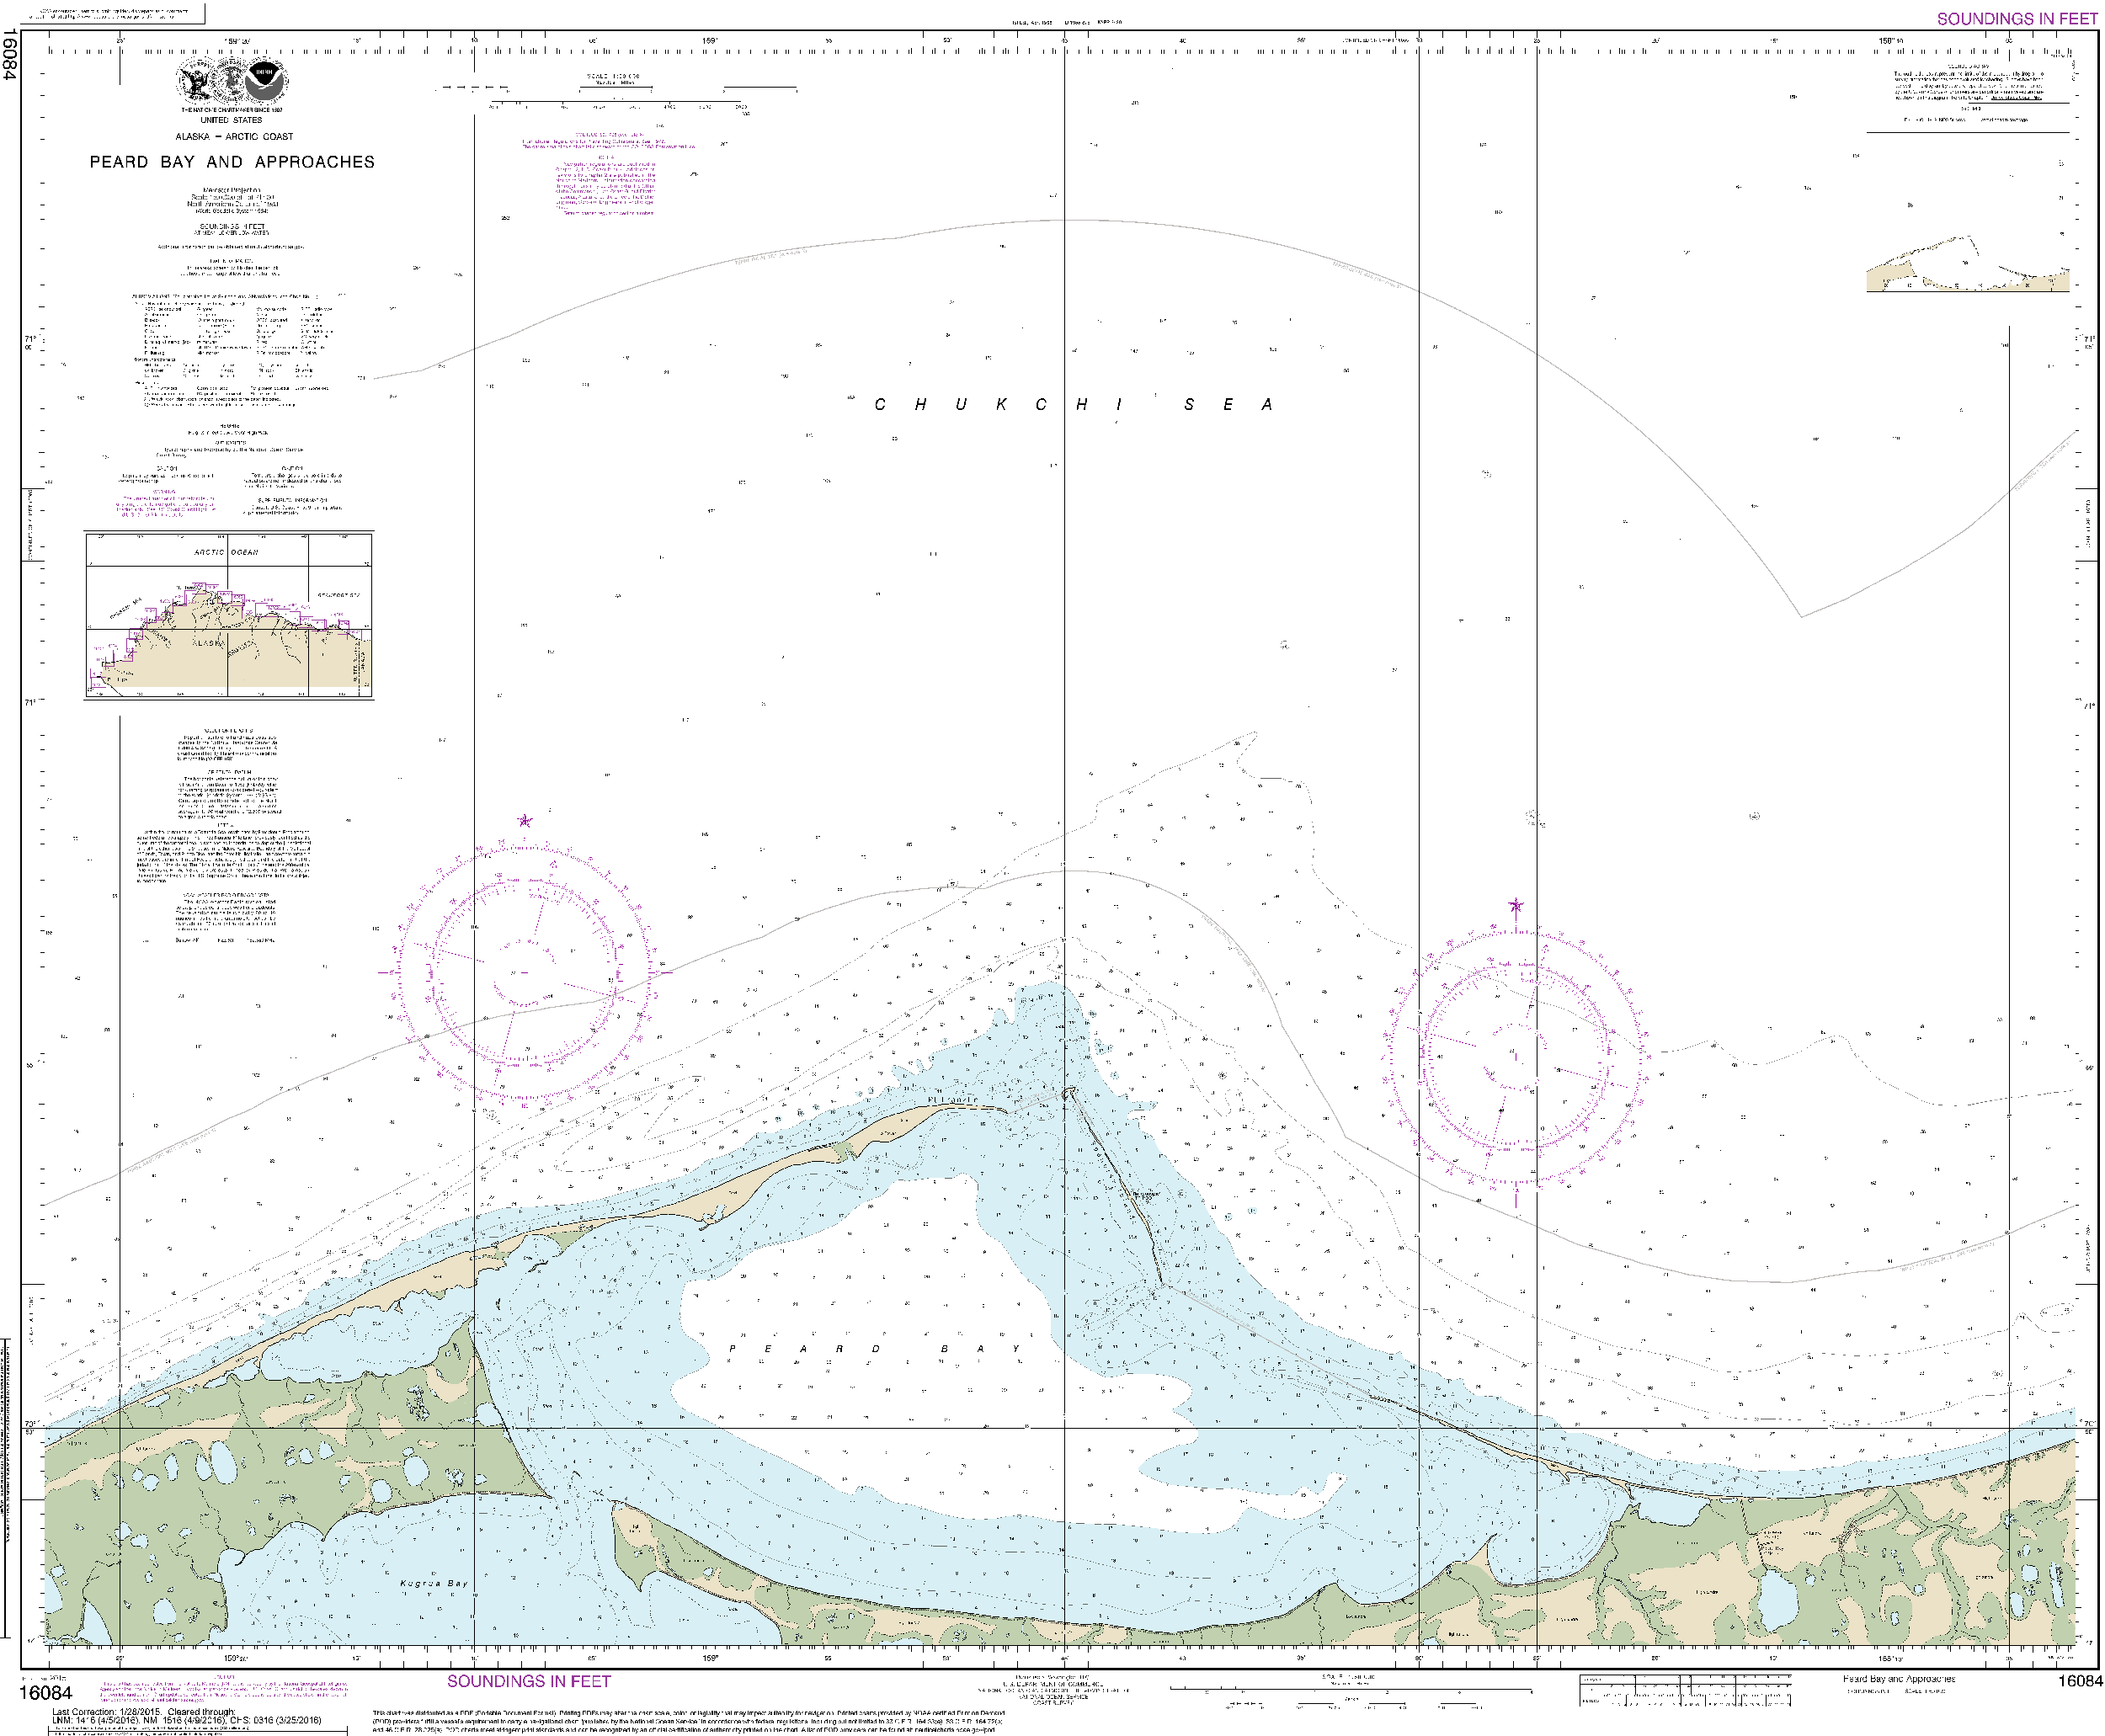 NOAA Nautical Chart 16084: Peard Bay and approaches